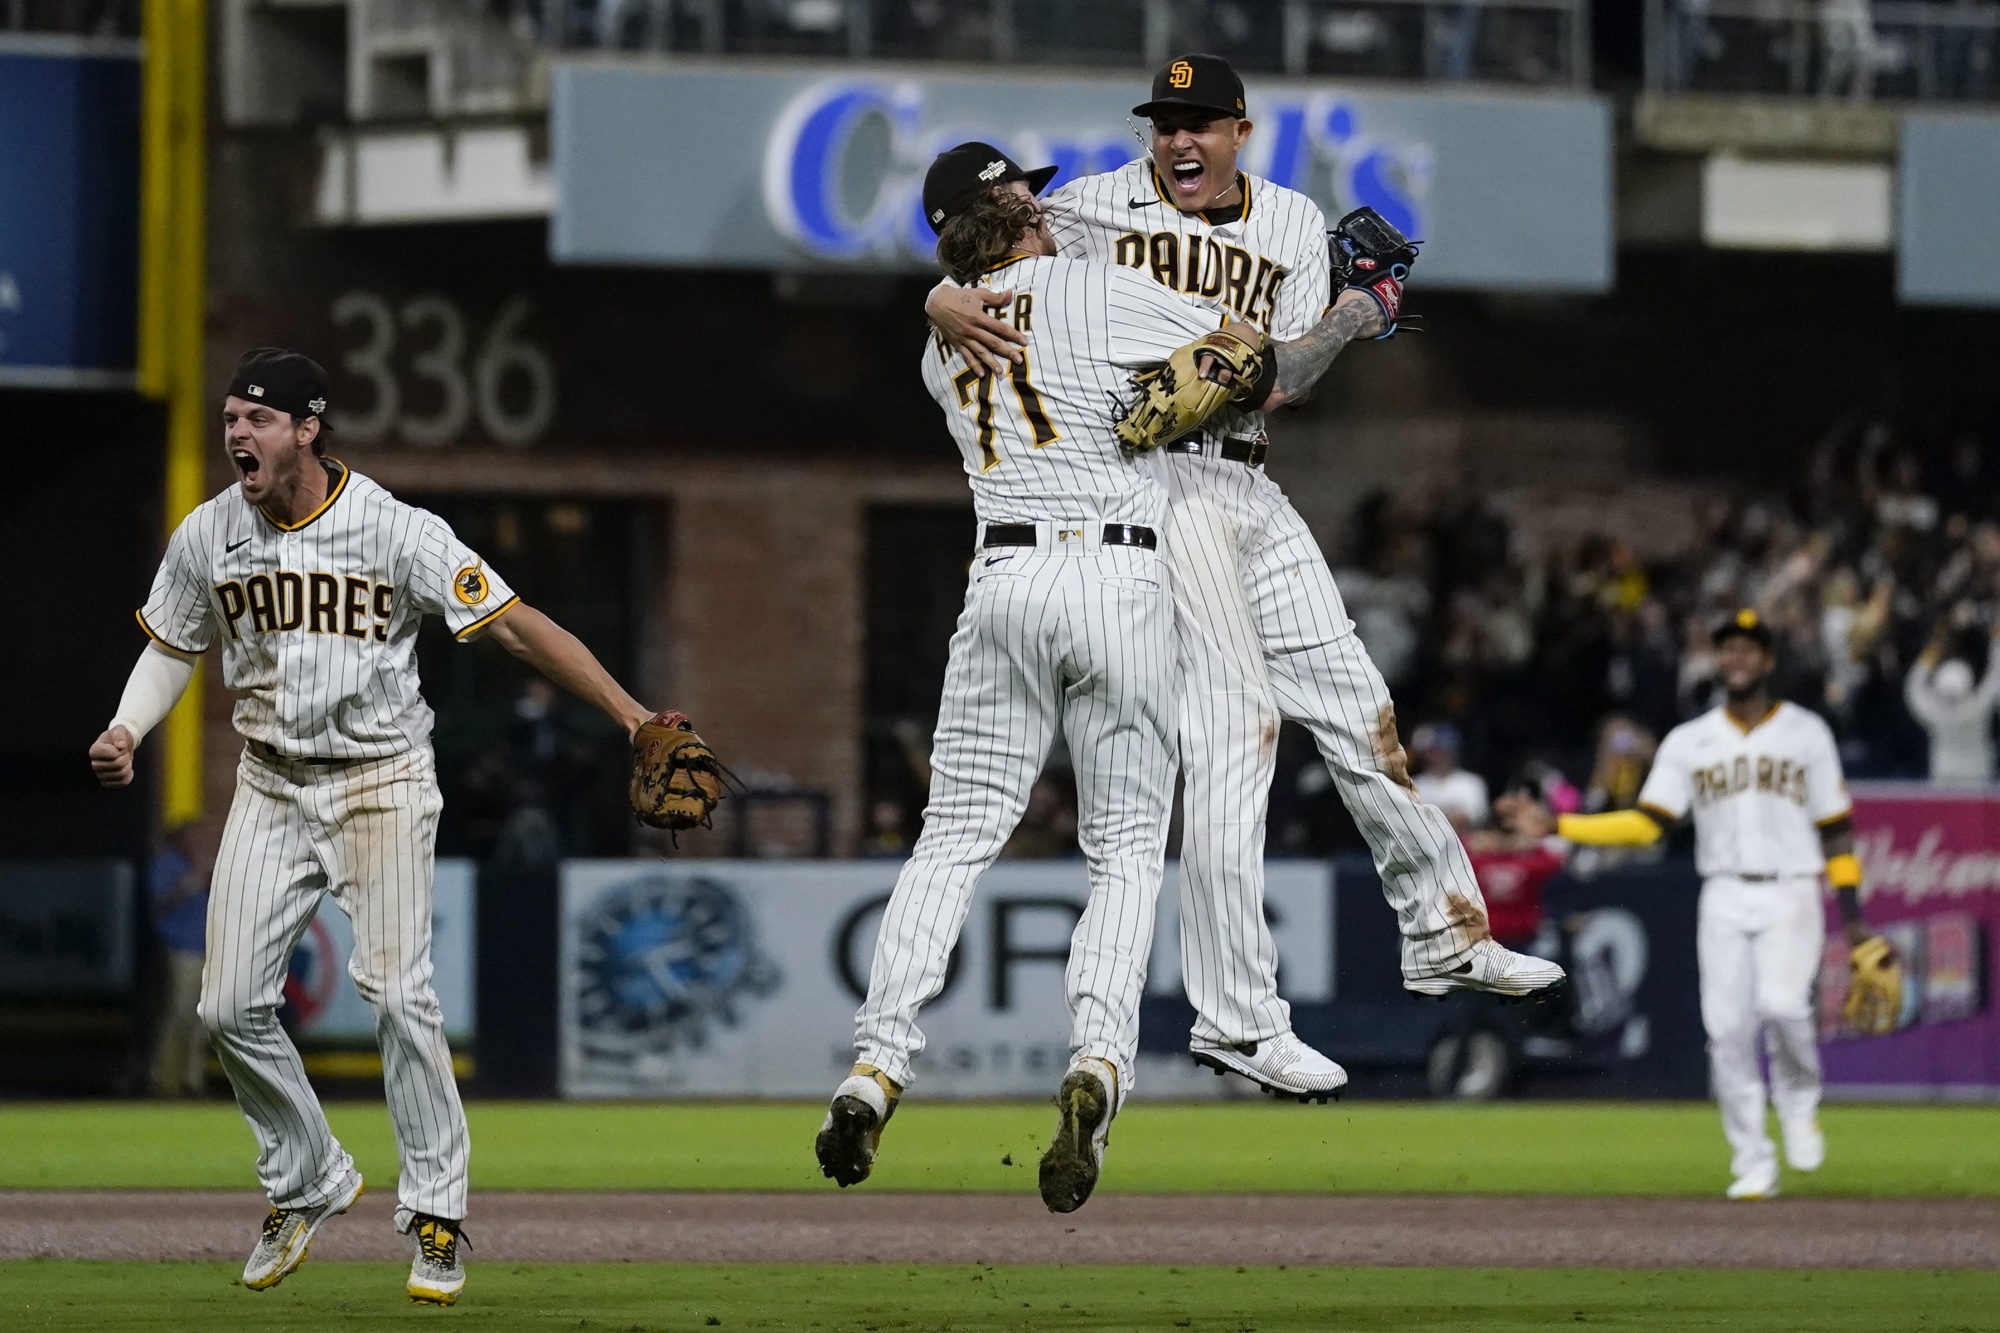 Cronenworth, Padres Rally to Stun Dodgers 5-3 to Reach NLCS - Bloomberg